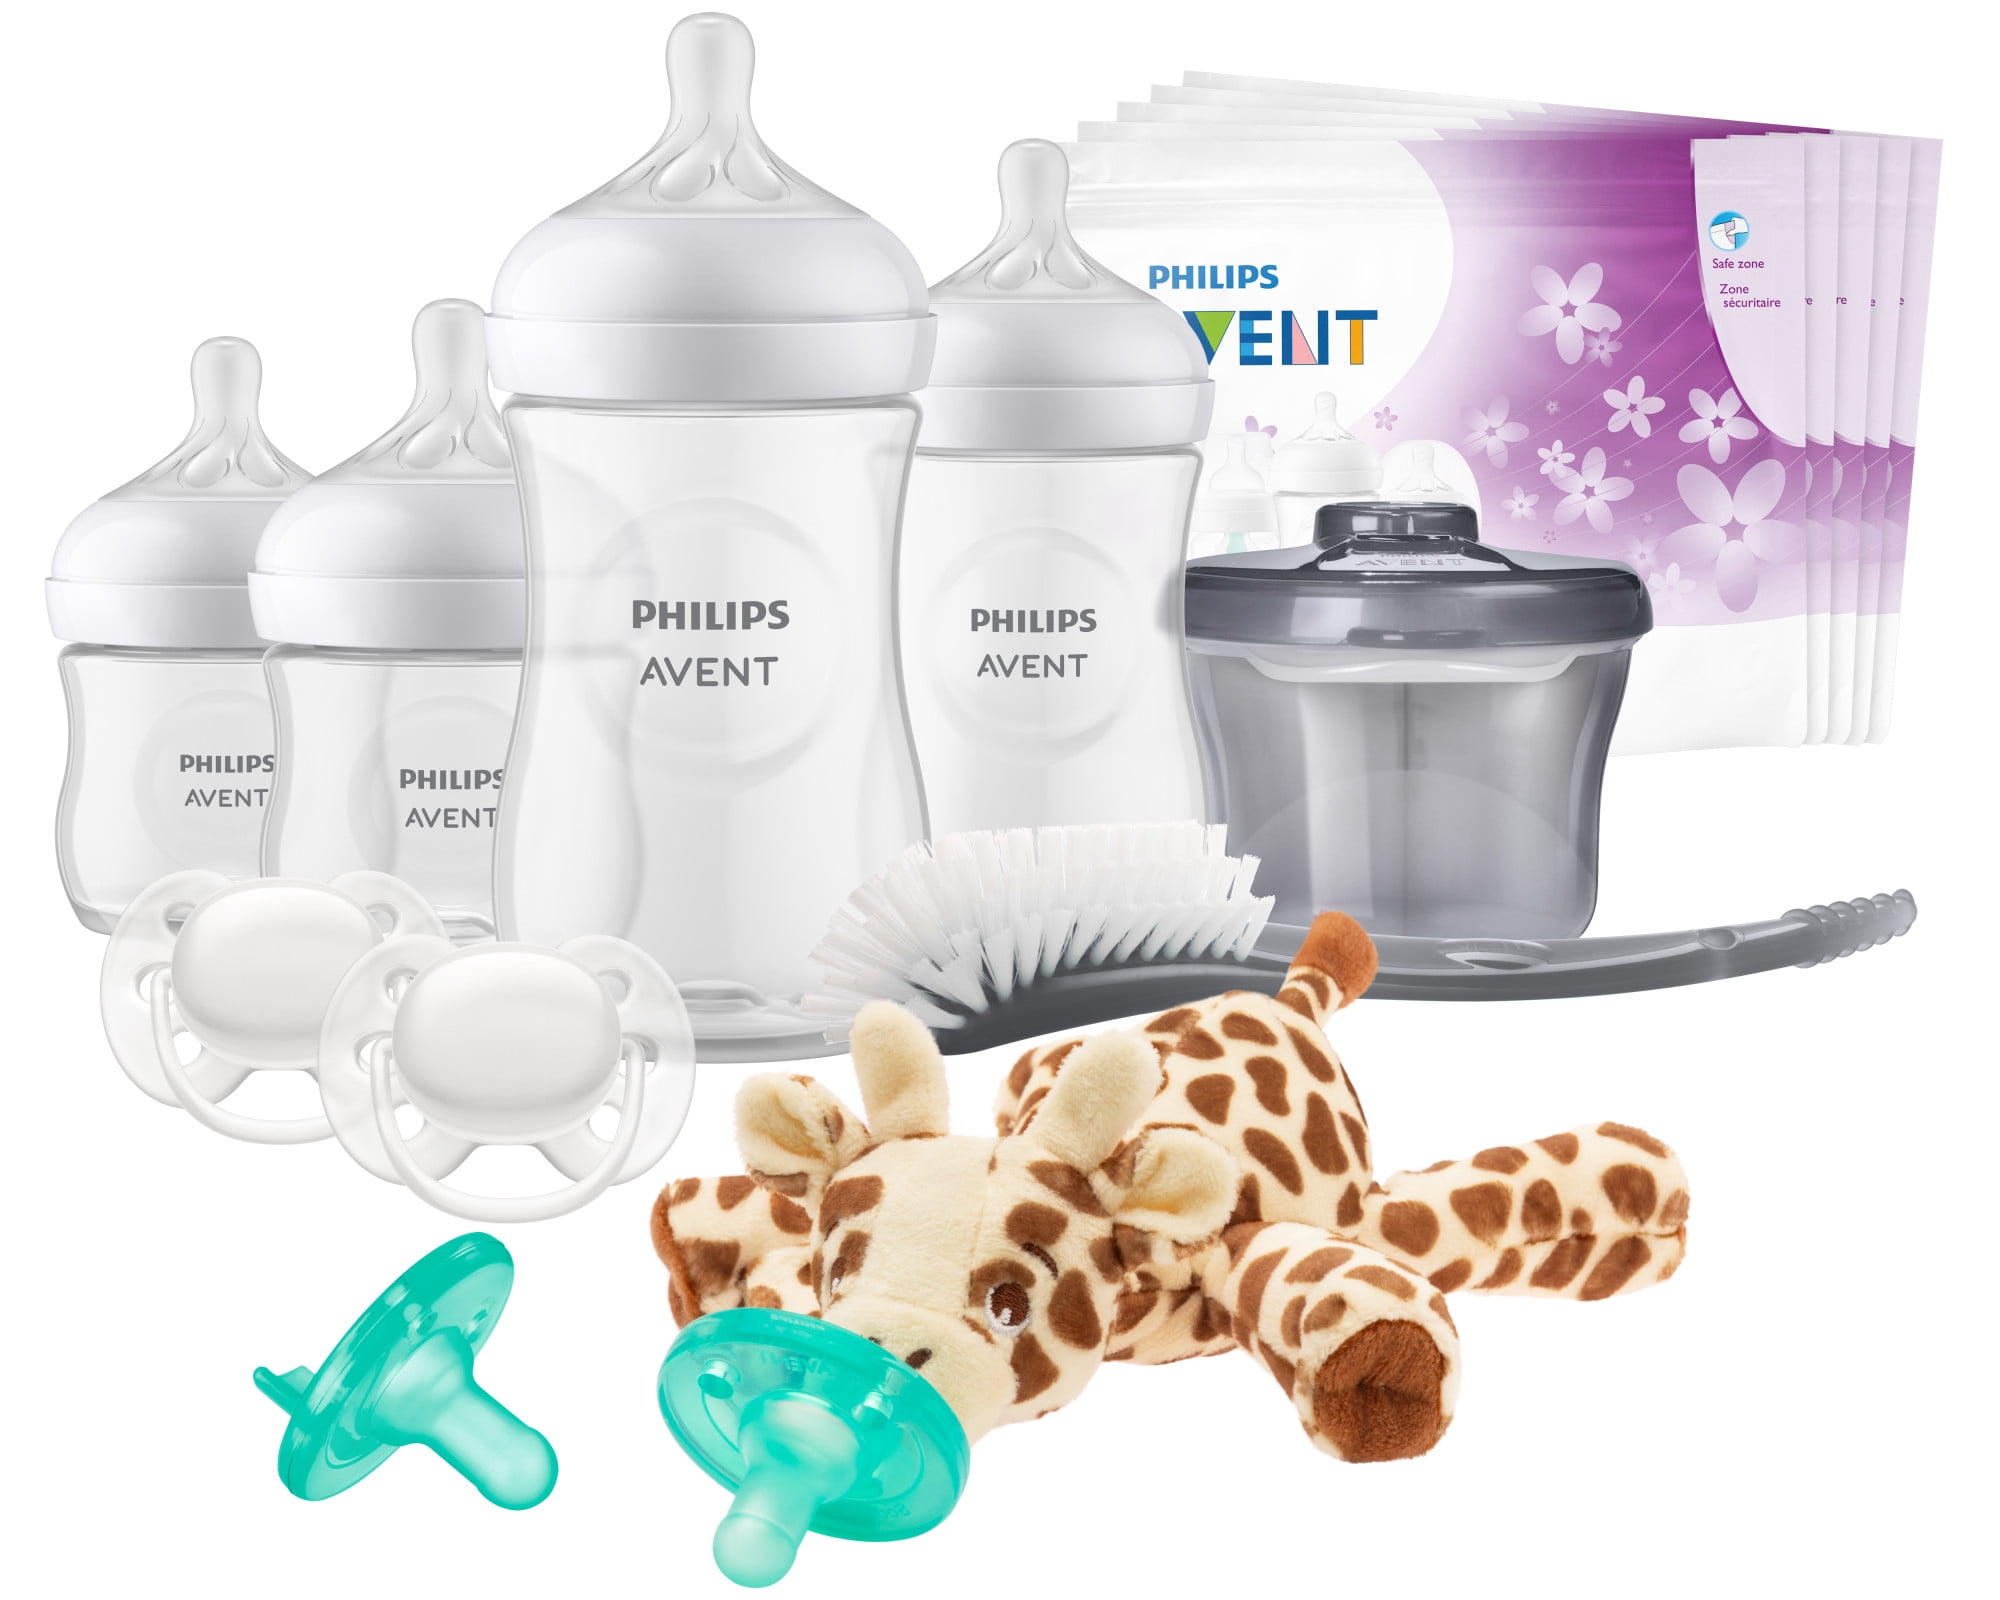 Philips Avent Natural Baby Bottle with Natural Response Nipple 